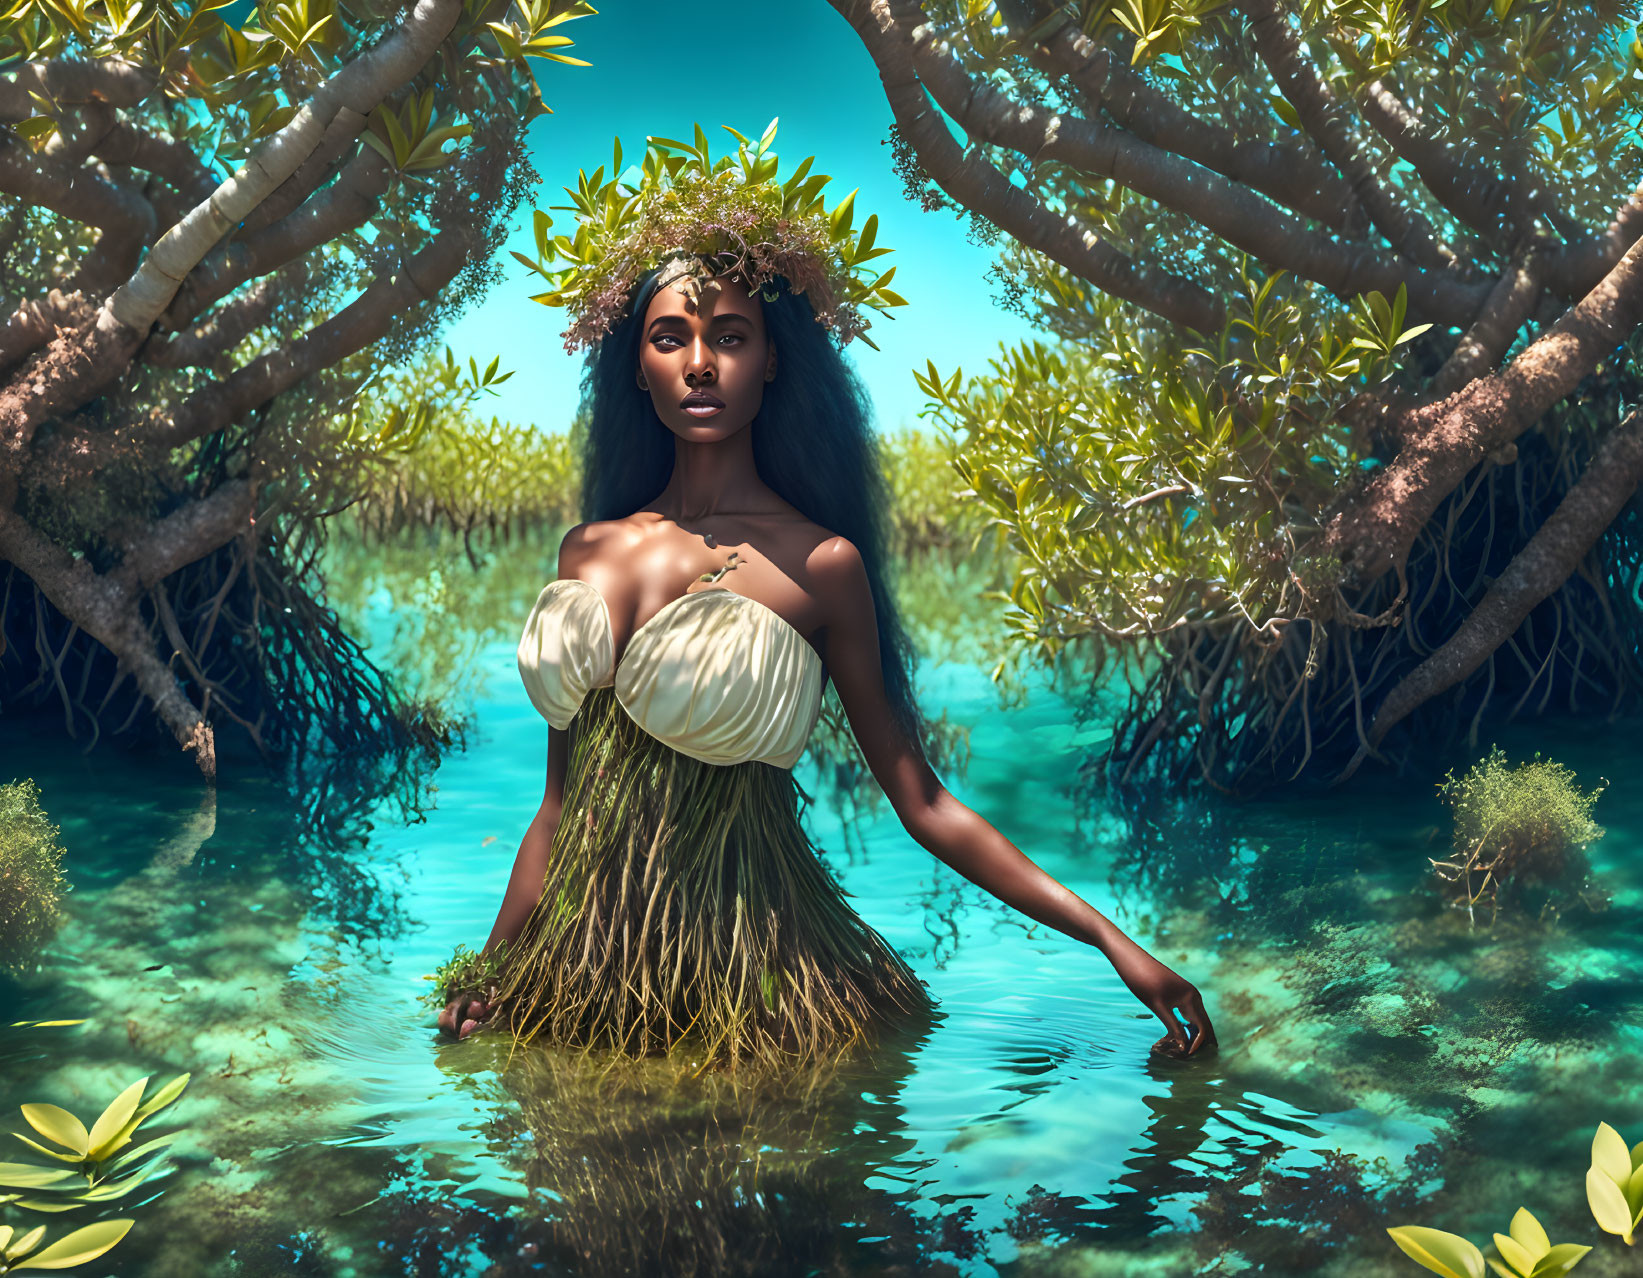 Woman in nature-inspired outfit with leafy crown among mangrove trees by serene waters